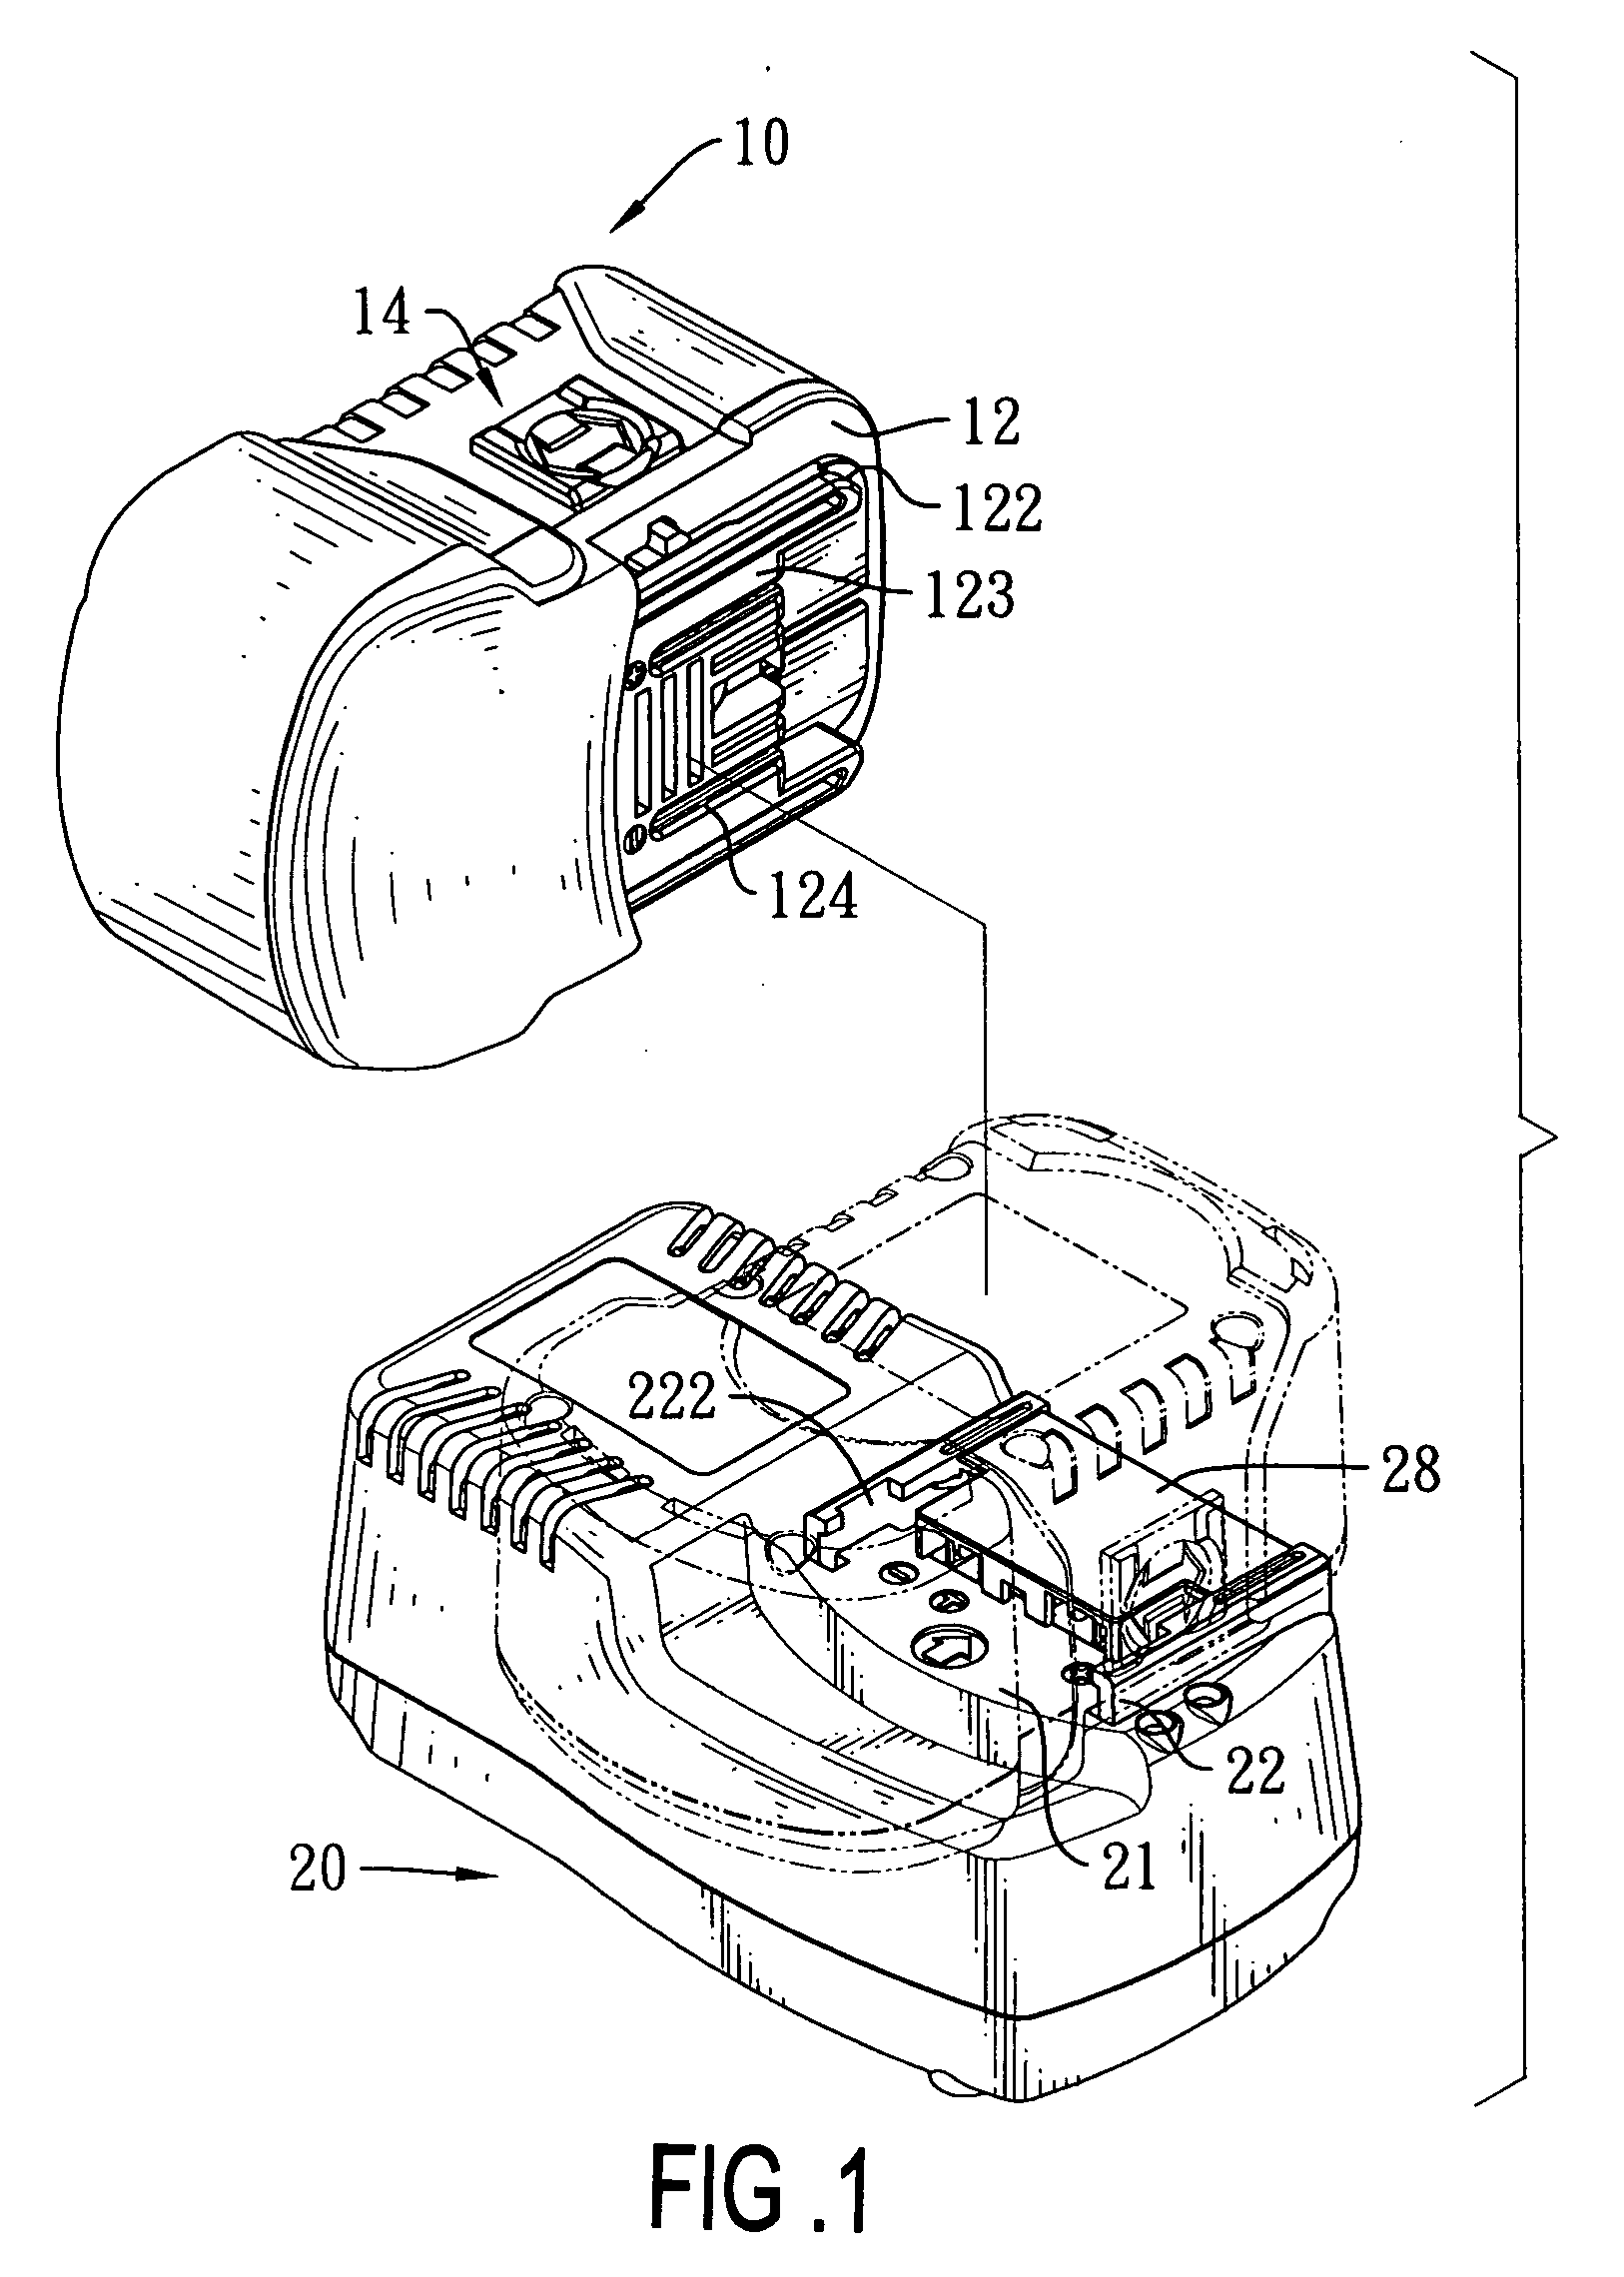 Power cell and charger assembly for an electrical tool